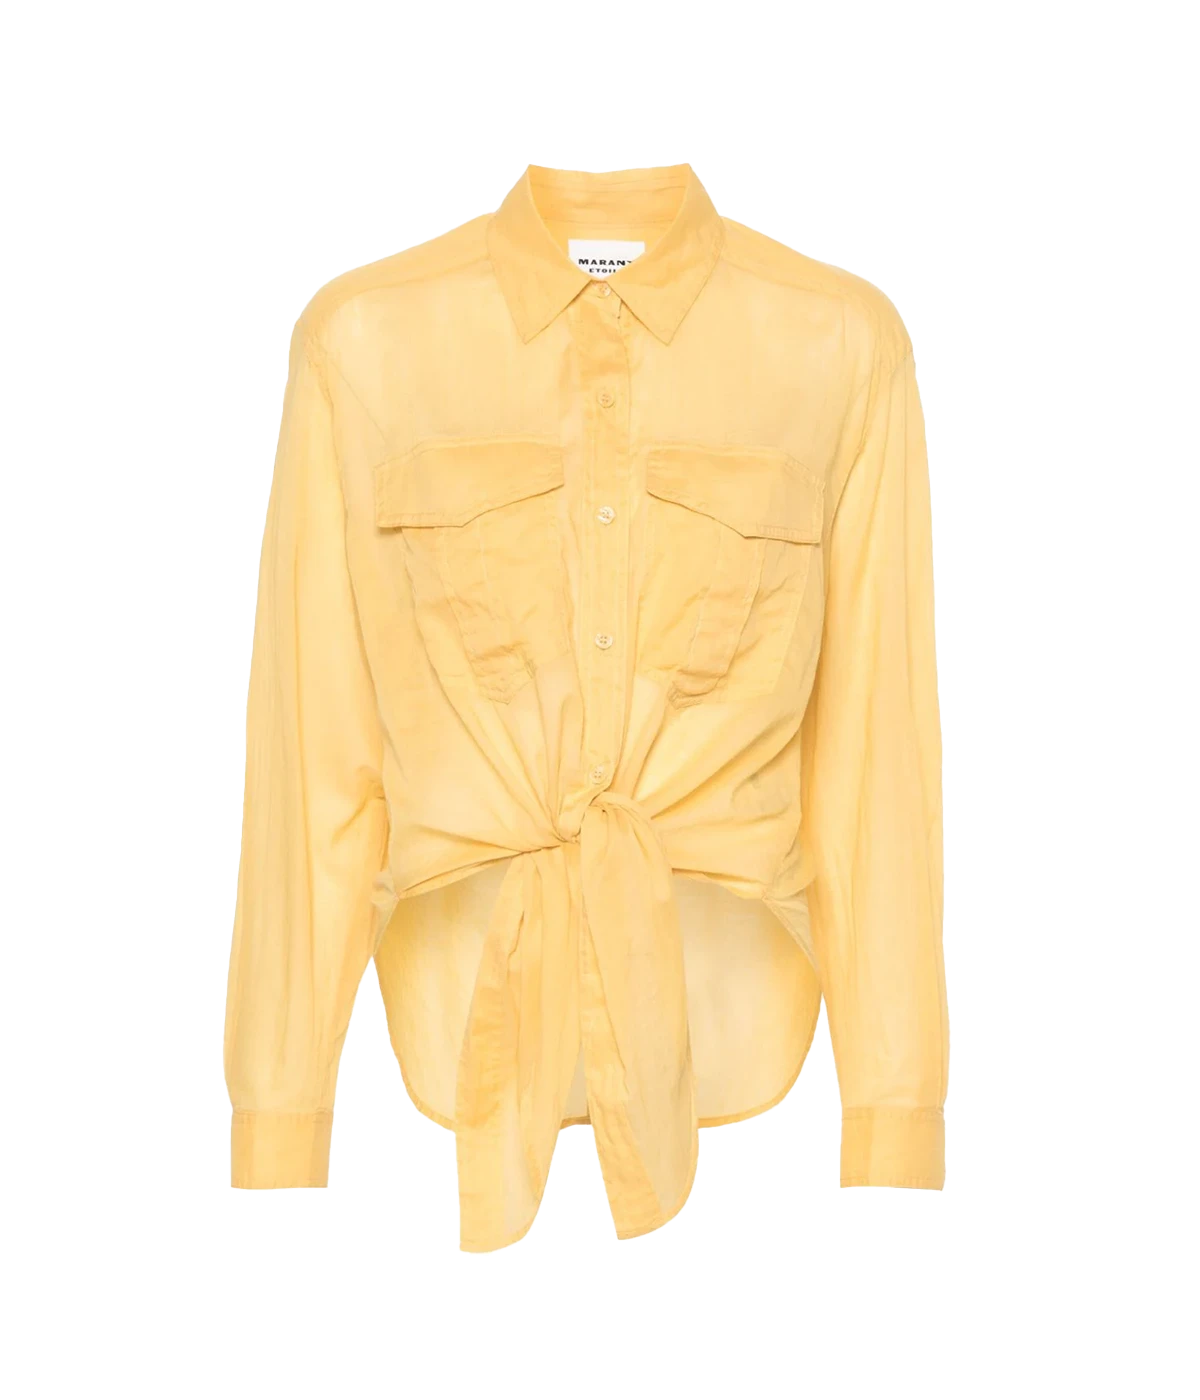 Long sleeve high low front button shirt by Isabel Marant. Wash and wear, bra friendly, versatile addition to your wardrobe. Gorgeous dark yellow cotton voile. 